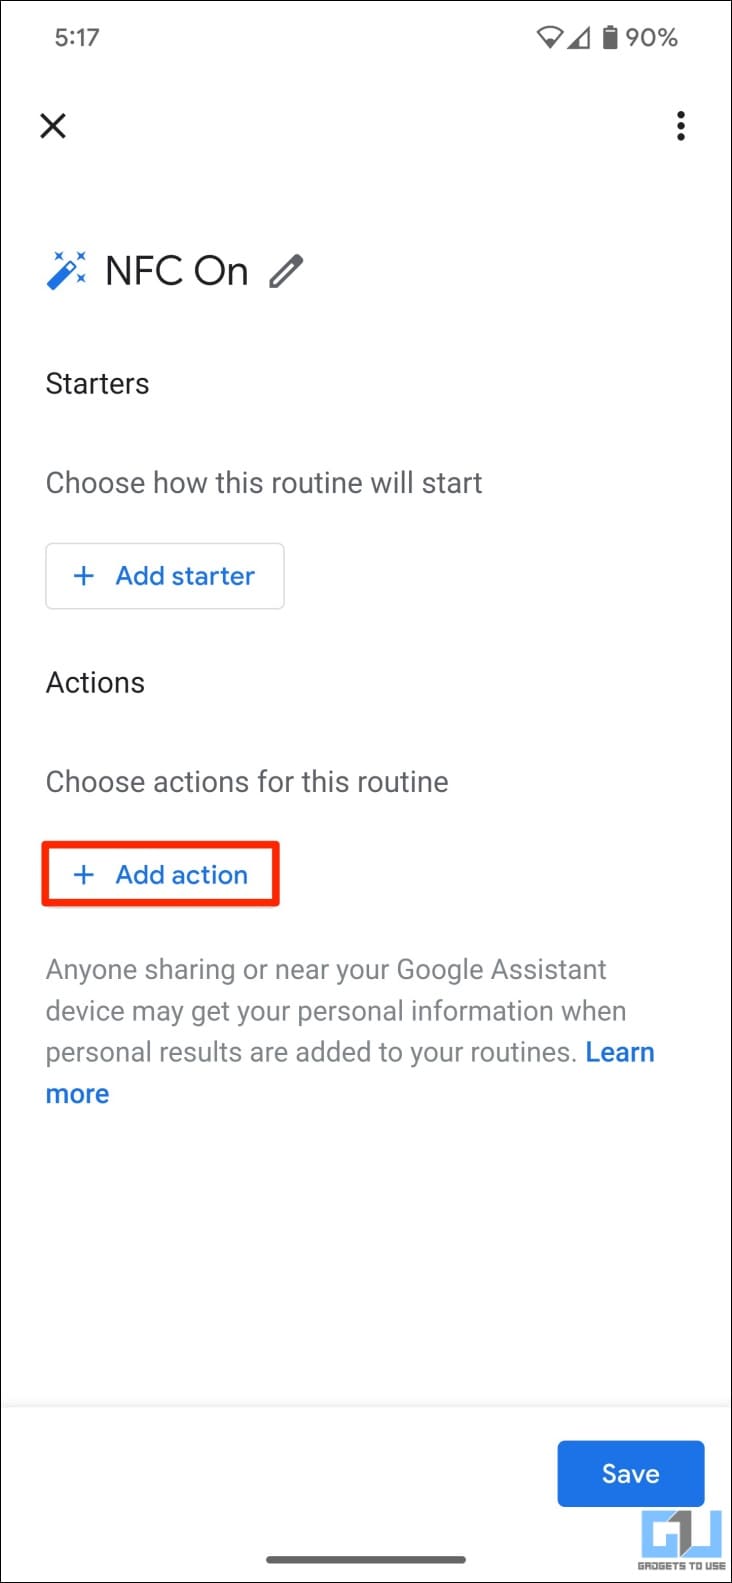 Select Add Action